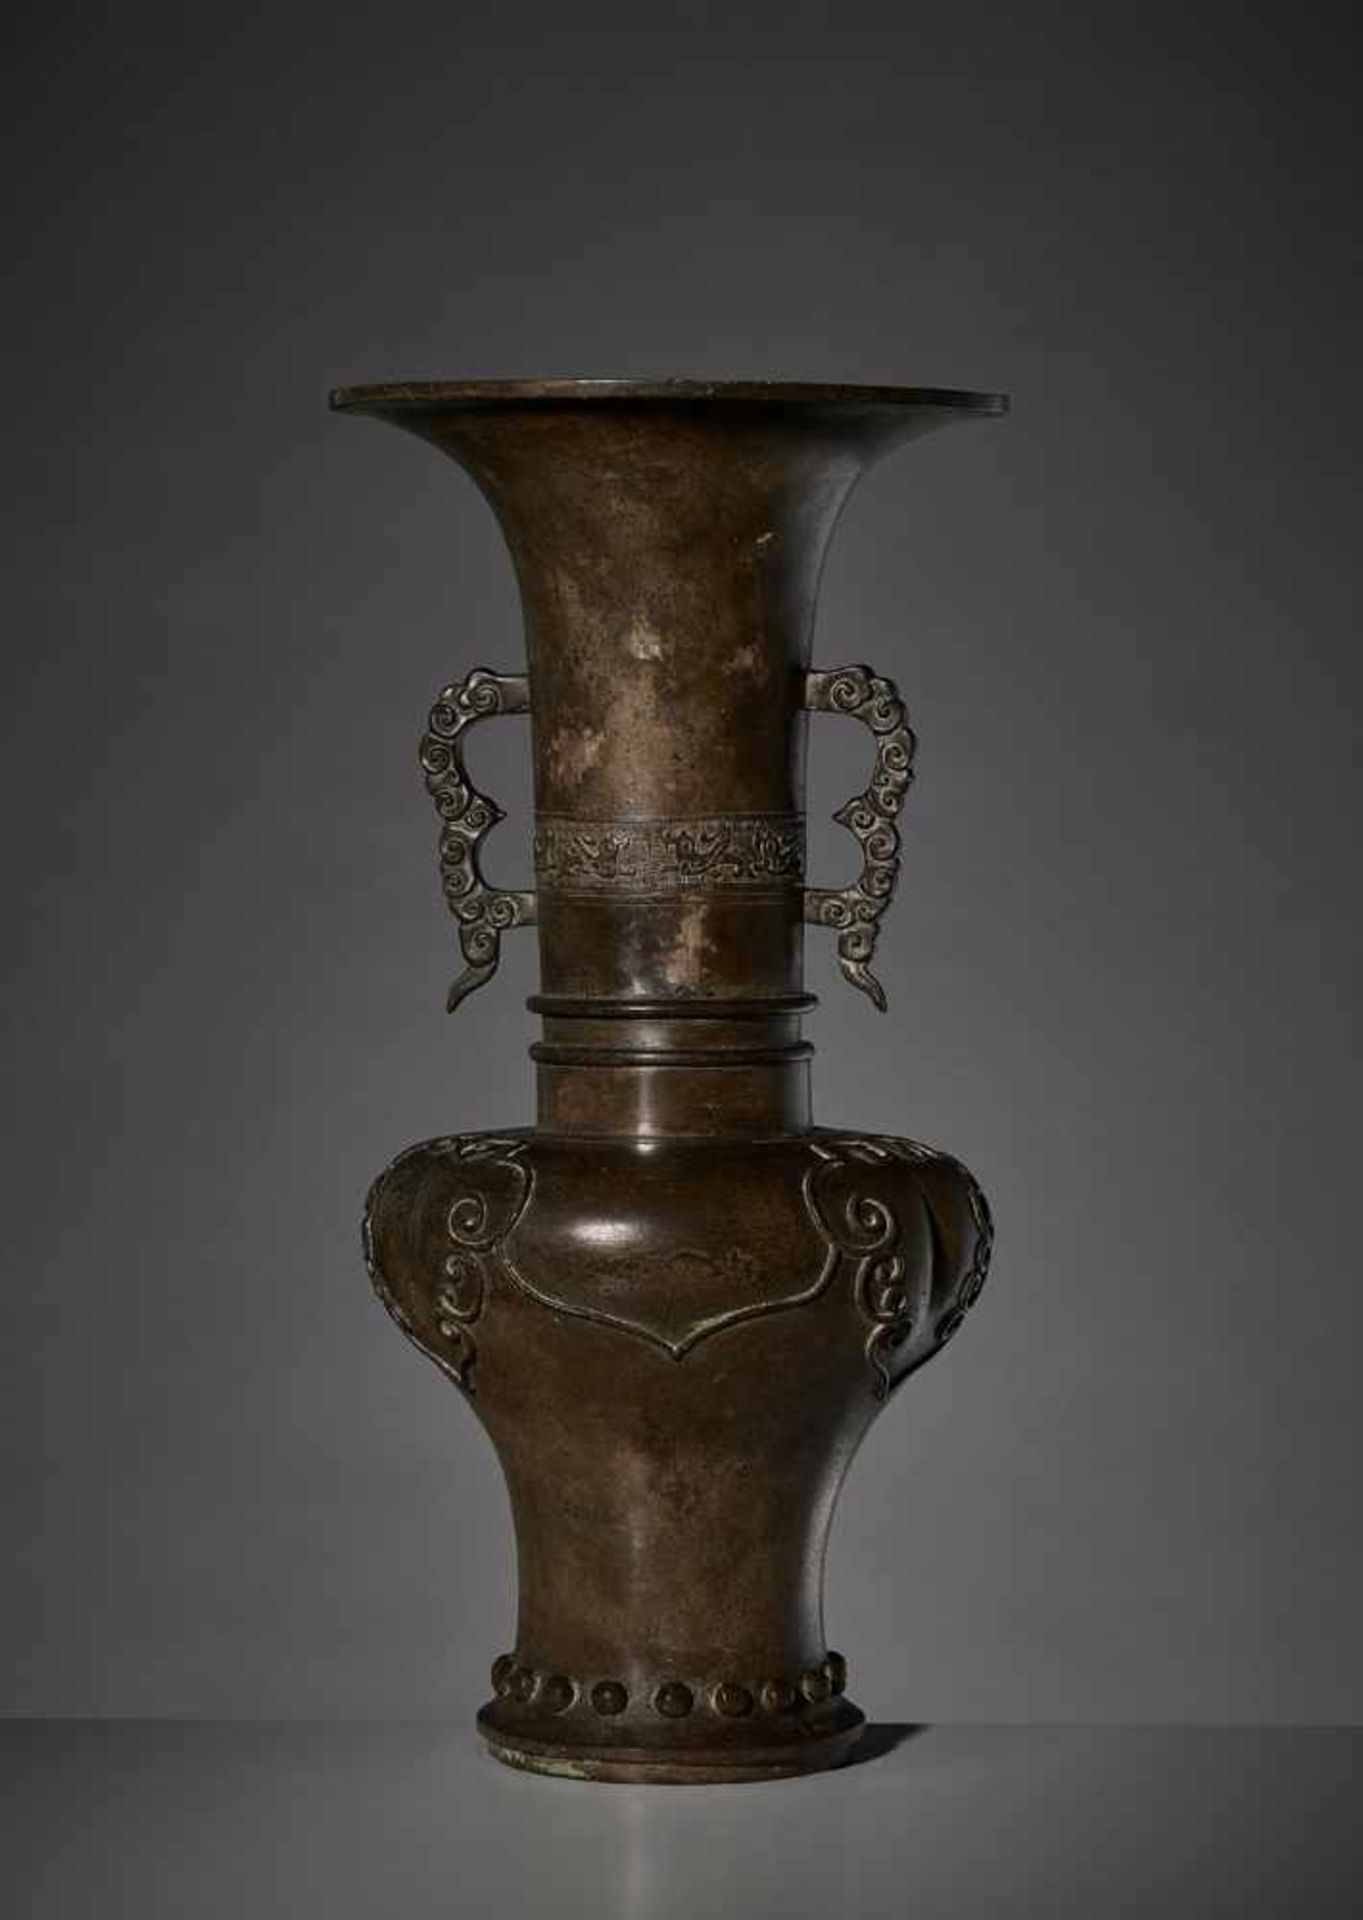 A LARGE BRONZE YEN YEN VASE China, 17th - 18th century. The wideshouldered body surmounted by a tall